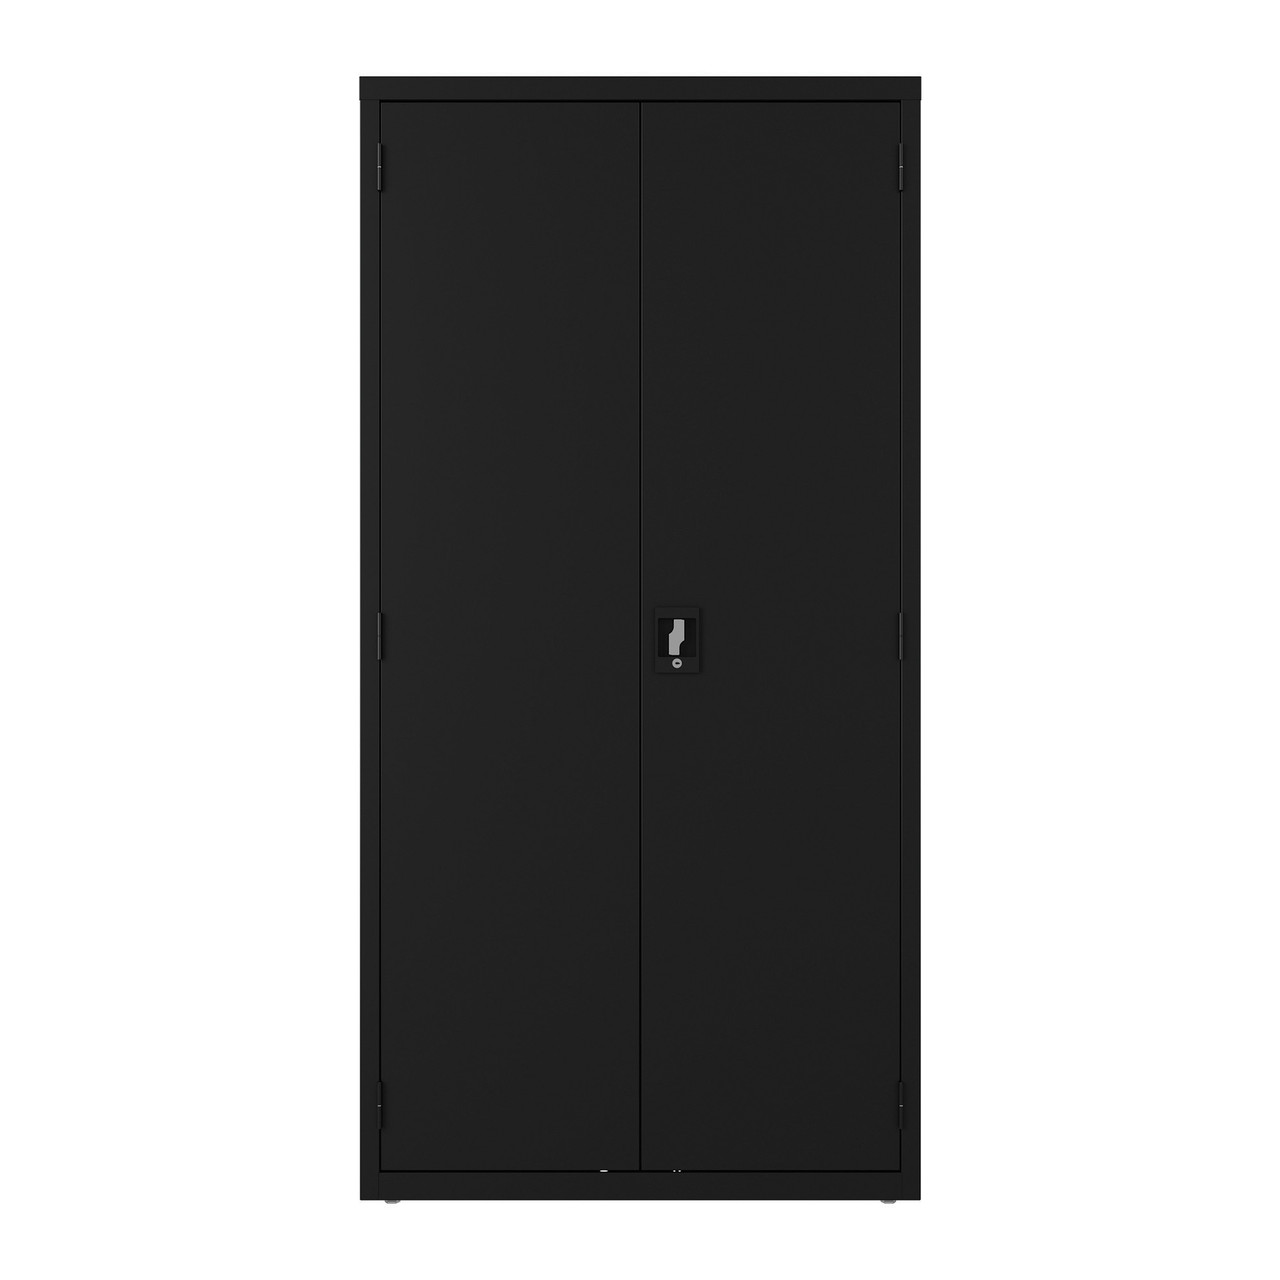 OfficeSource Steel Storage Cabinet Collection Janitor Closet - COE